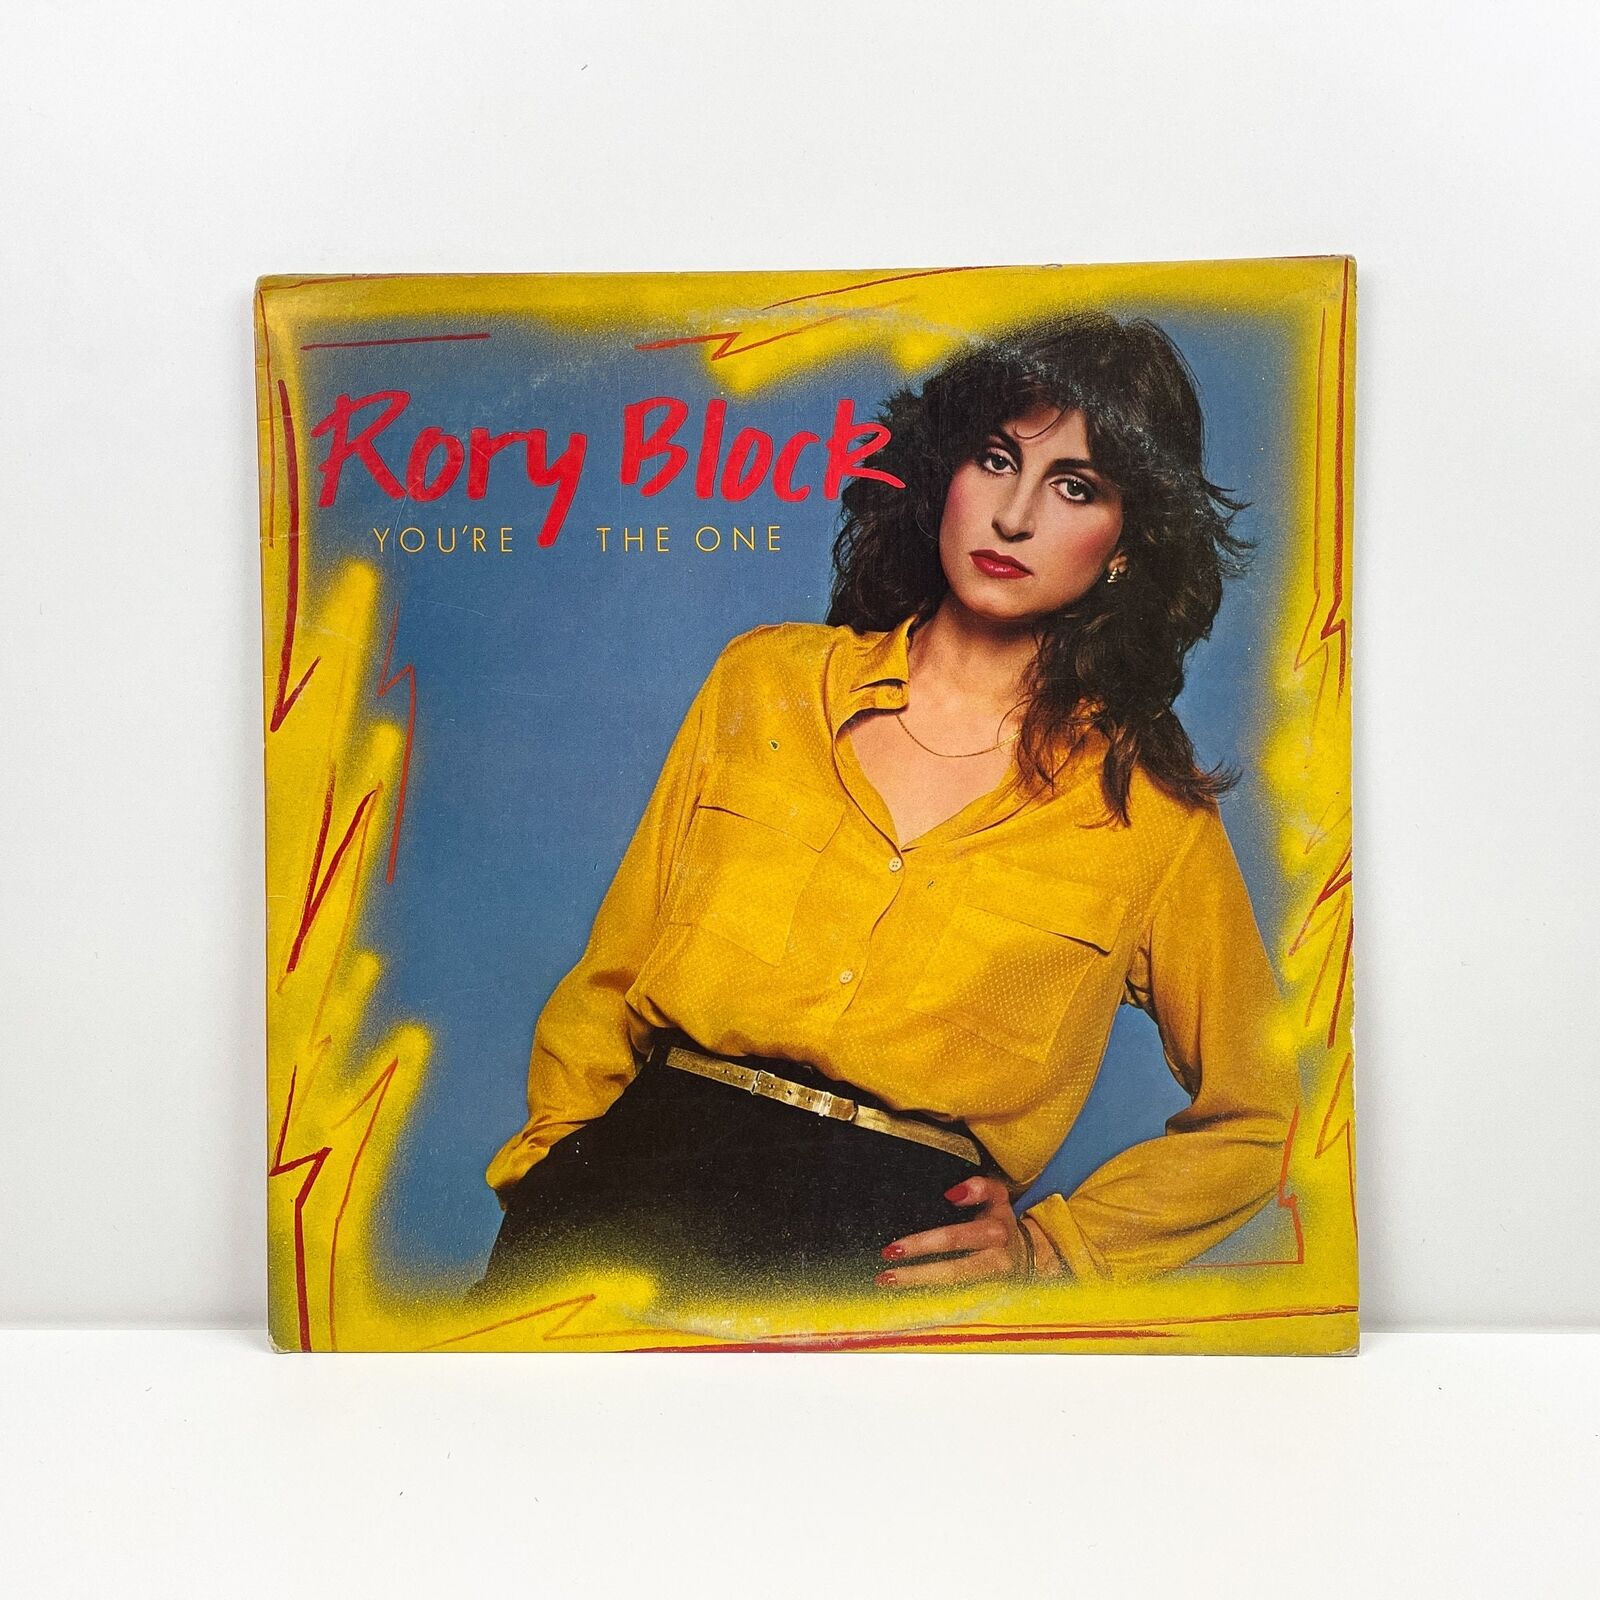 Rory Block - You're The One - Vinyl LP Record - 1979